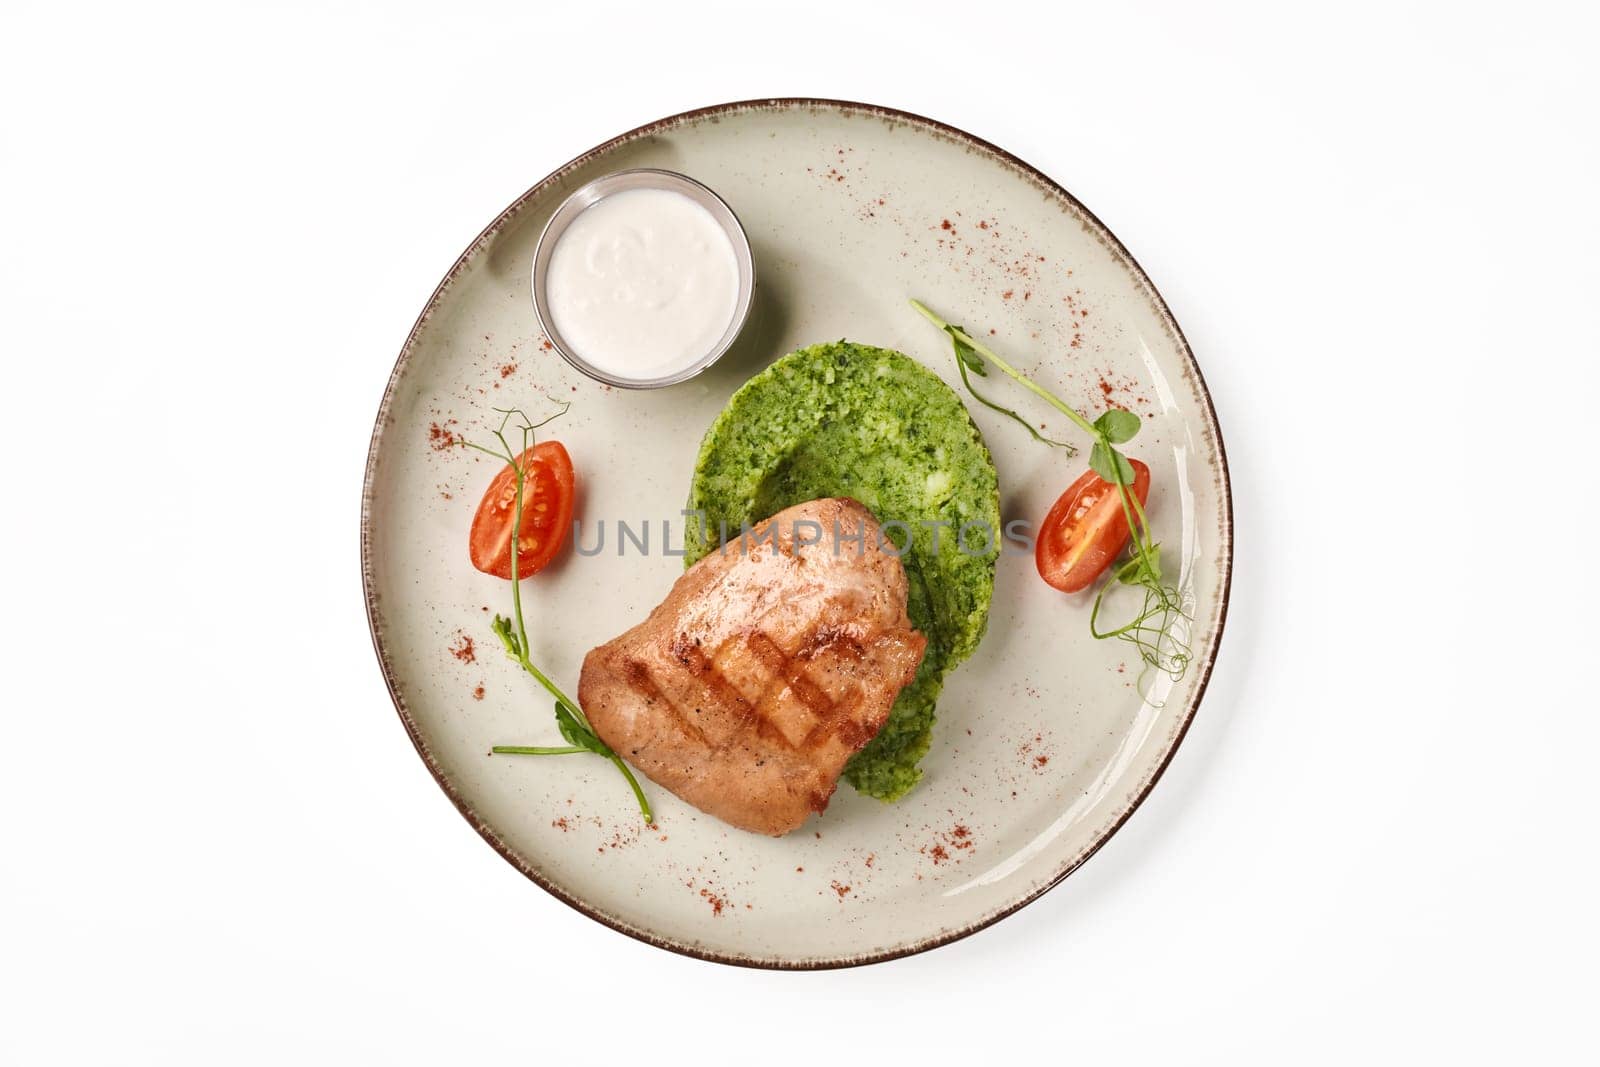 Grilled chicken breast with broccoli puree and sauce by nazarovsergey